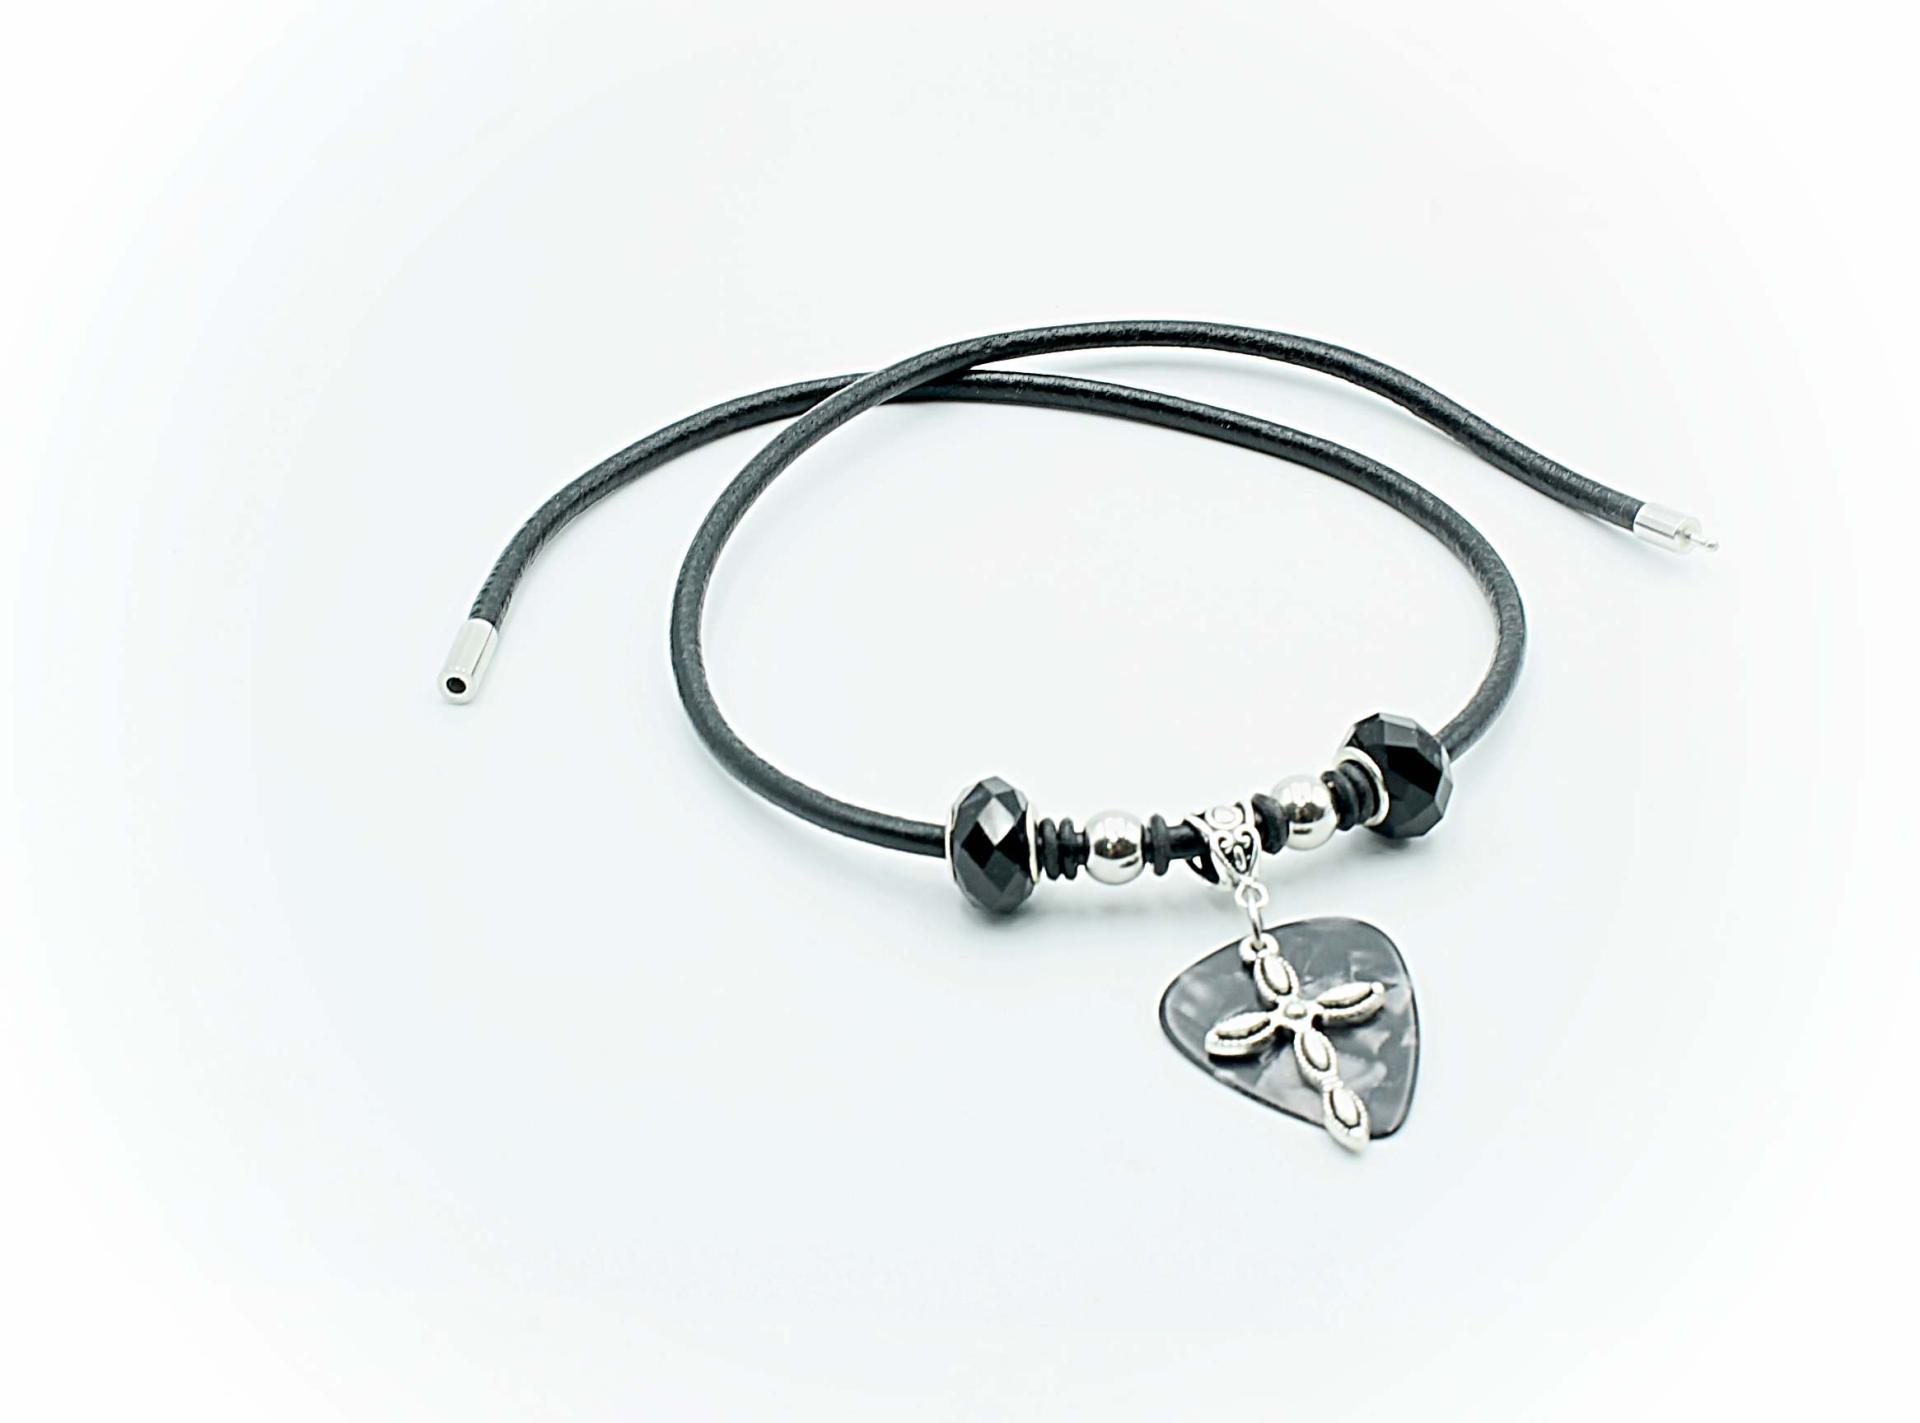 Guitar Pick Necklace With Cross - Genuine Leather -Premier Collection